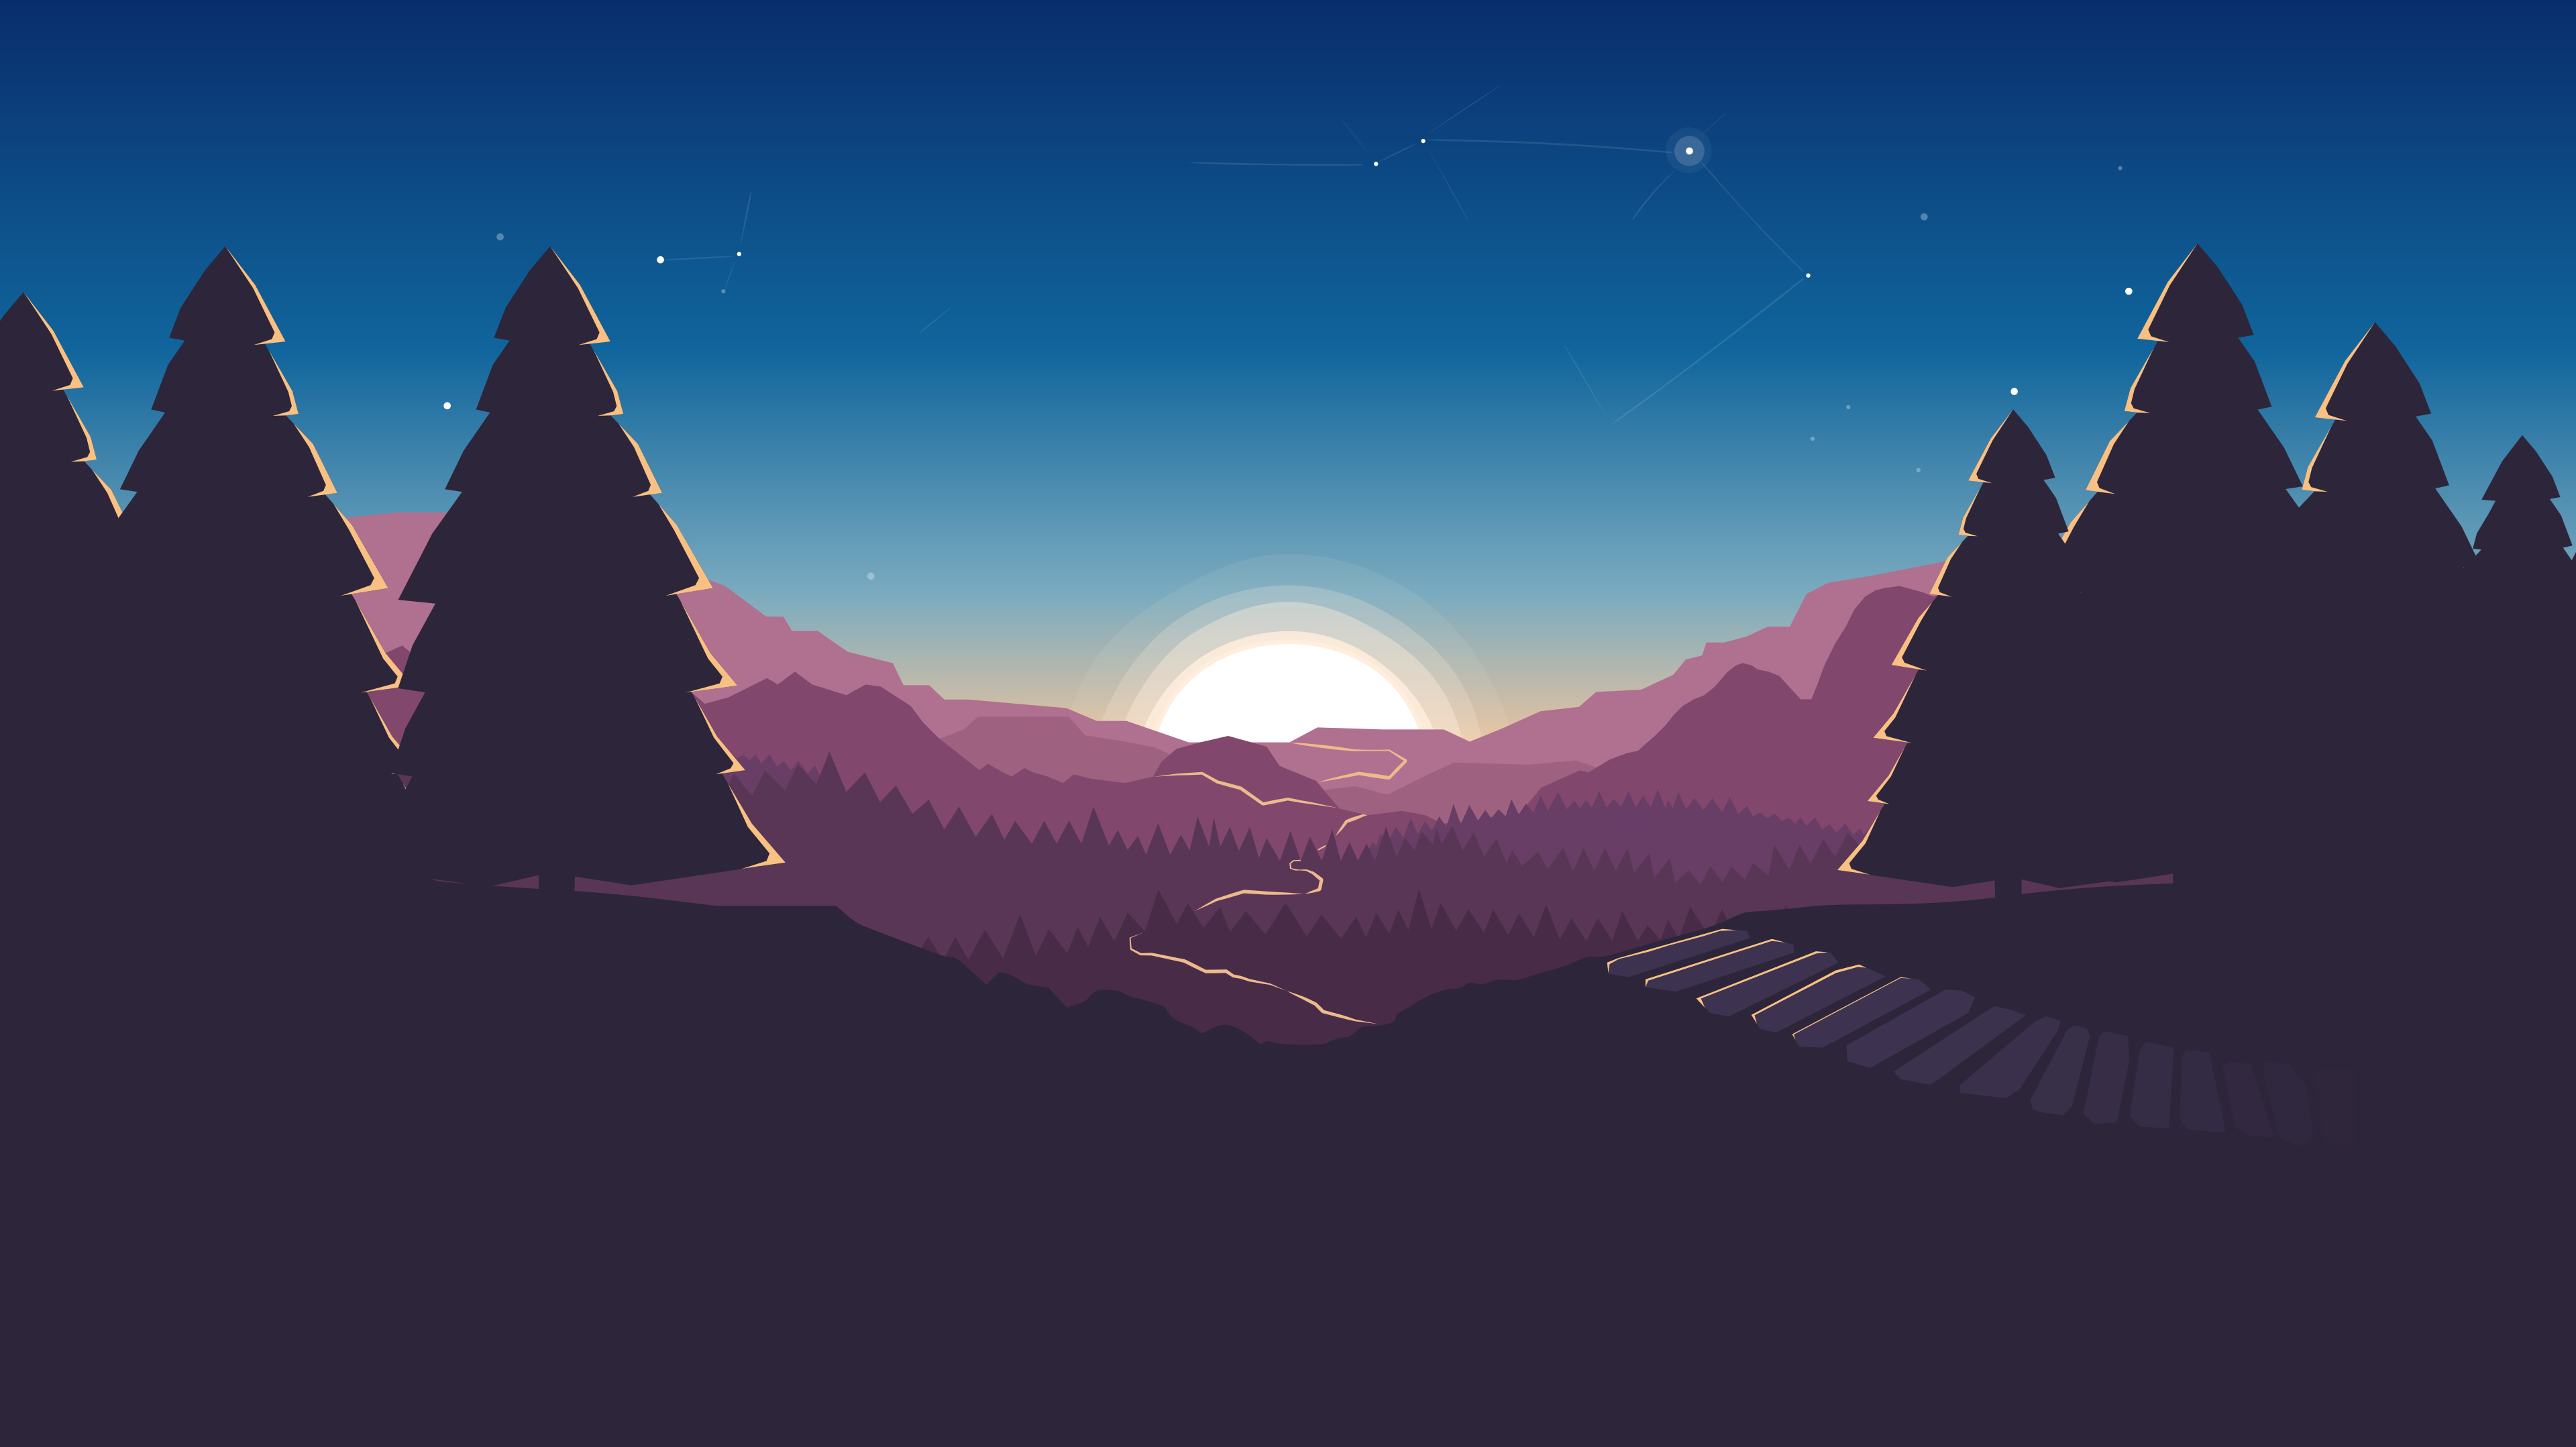 Firefox Background Image As Wallpaper Versions With And